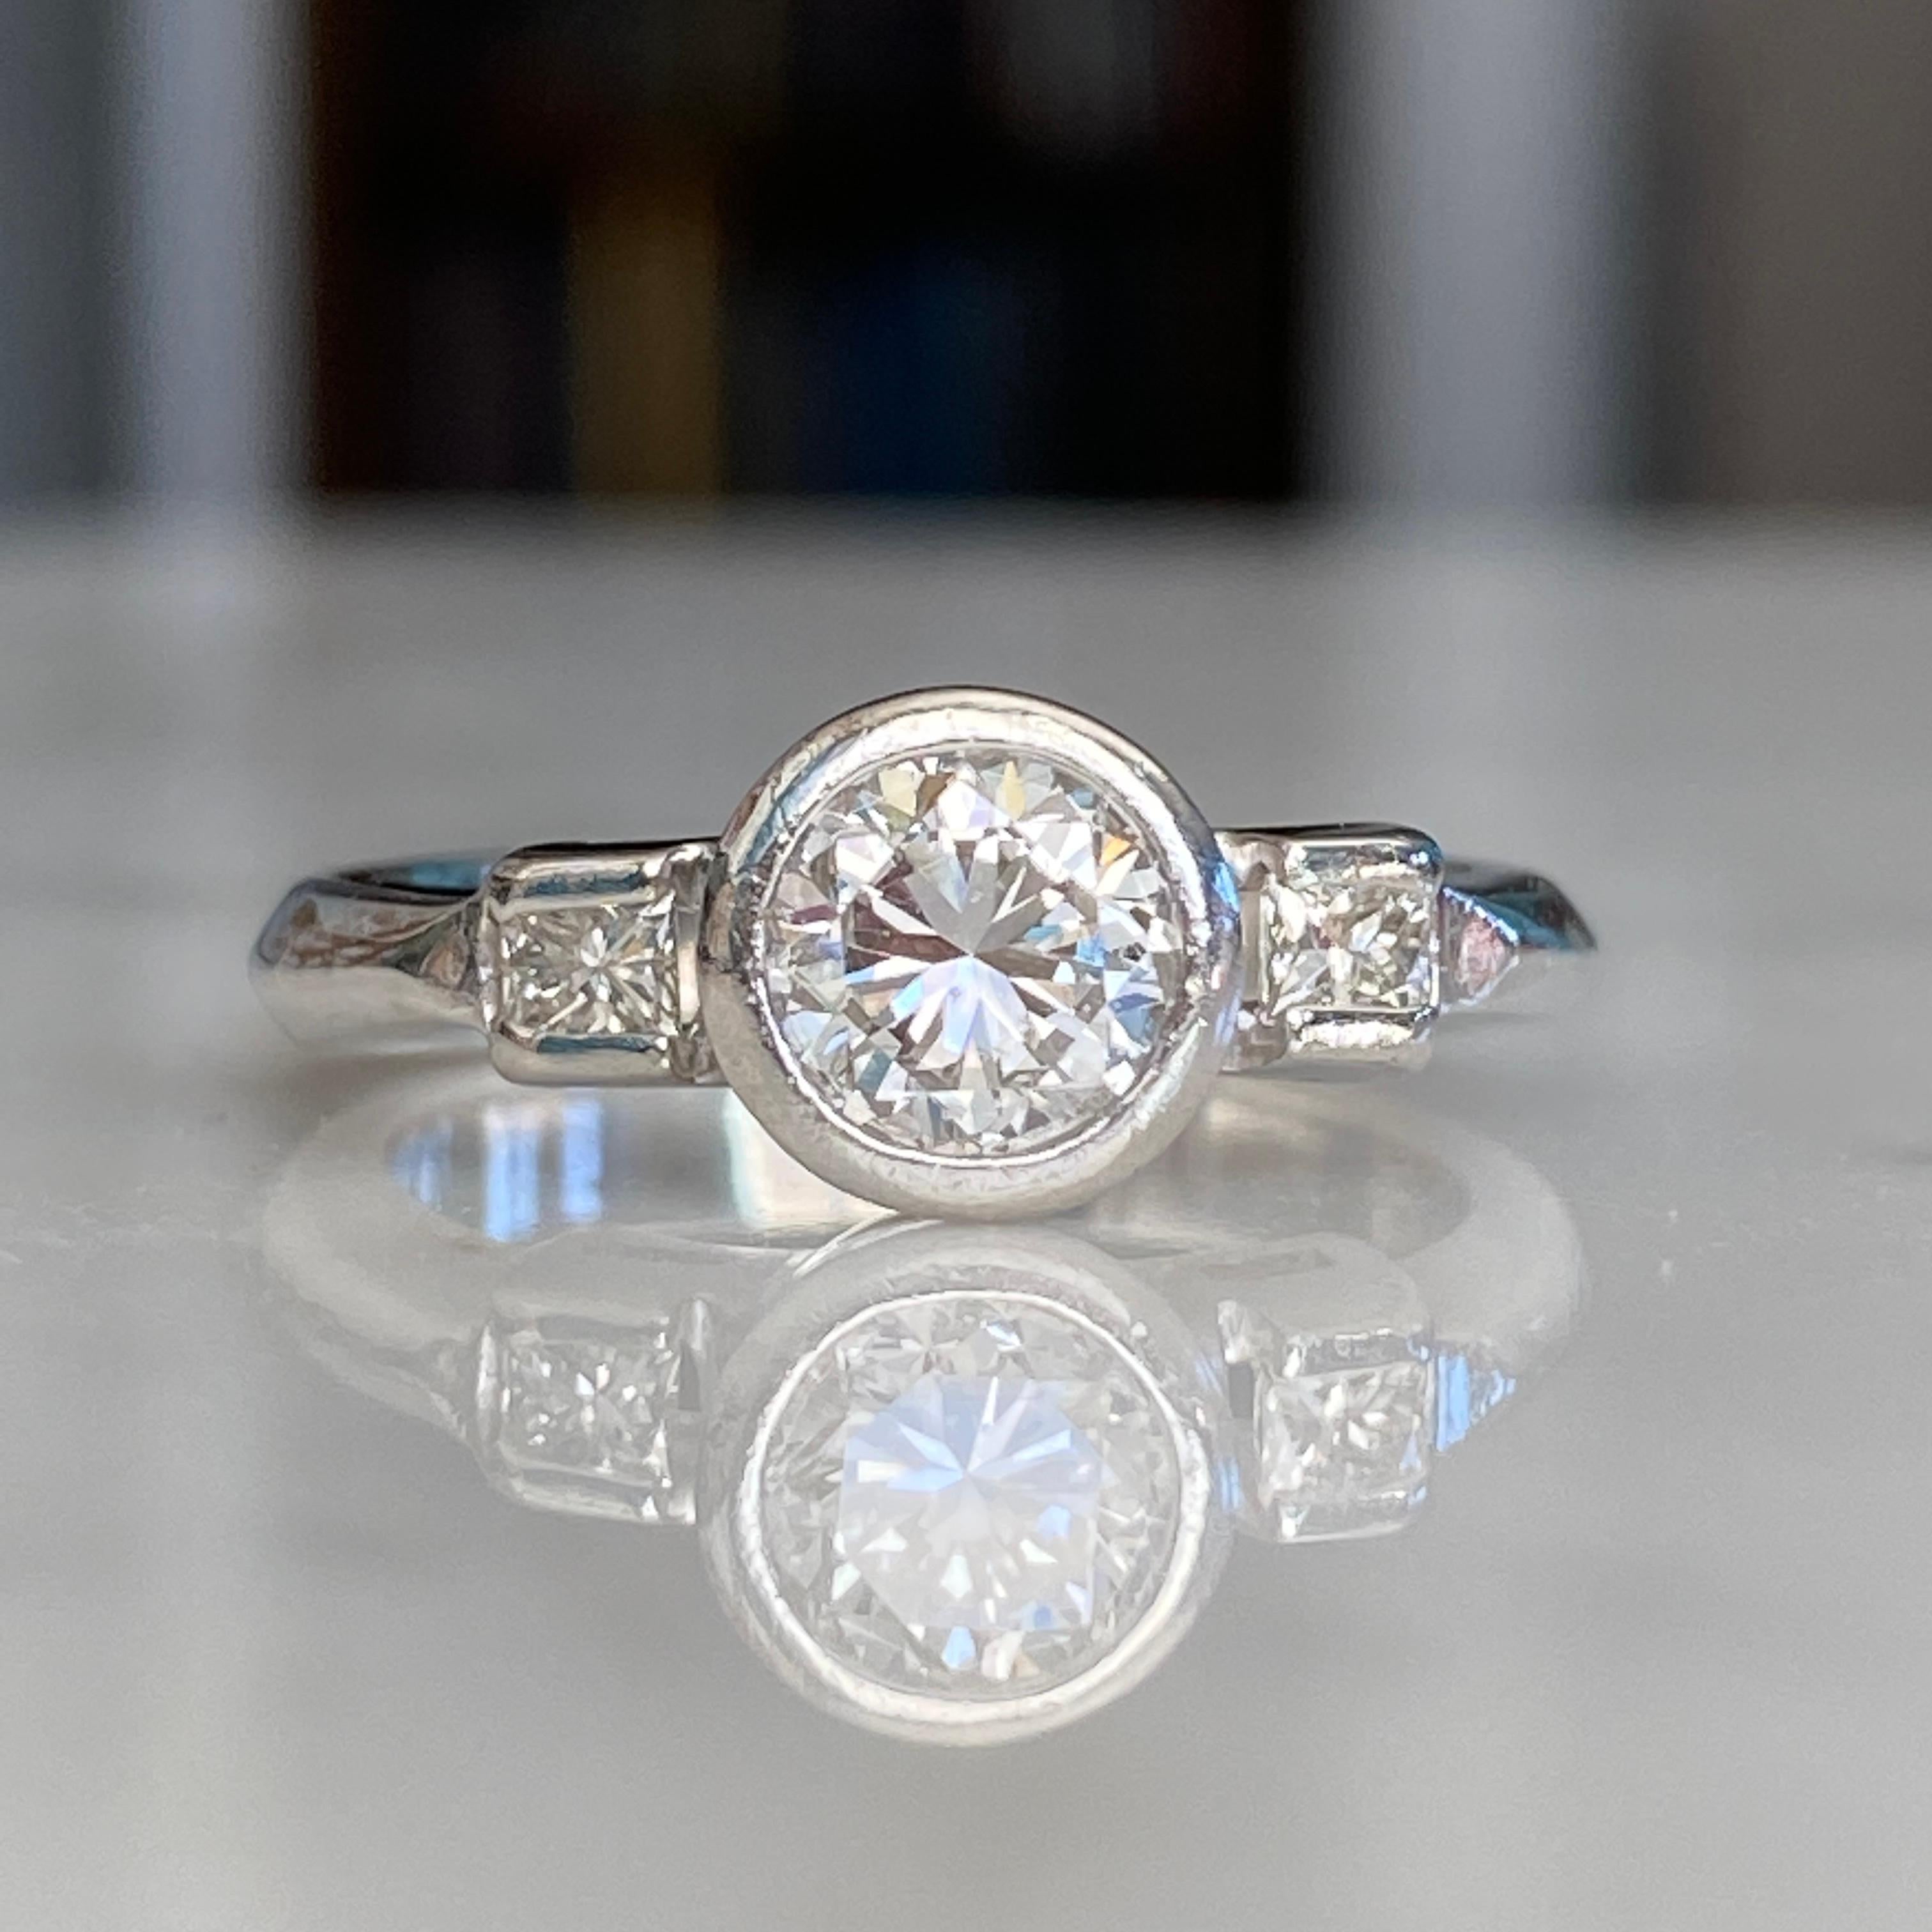 Details:
Modern vintage with a sweet heart carved into the side of this Mid-Century 1940's Platinum Diamond ring. This ring has a round brilliant cut measuring .83cts, with a combined total weight of just under one carat—.98 carats. A classic, and